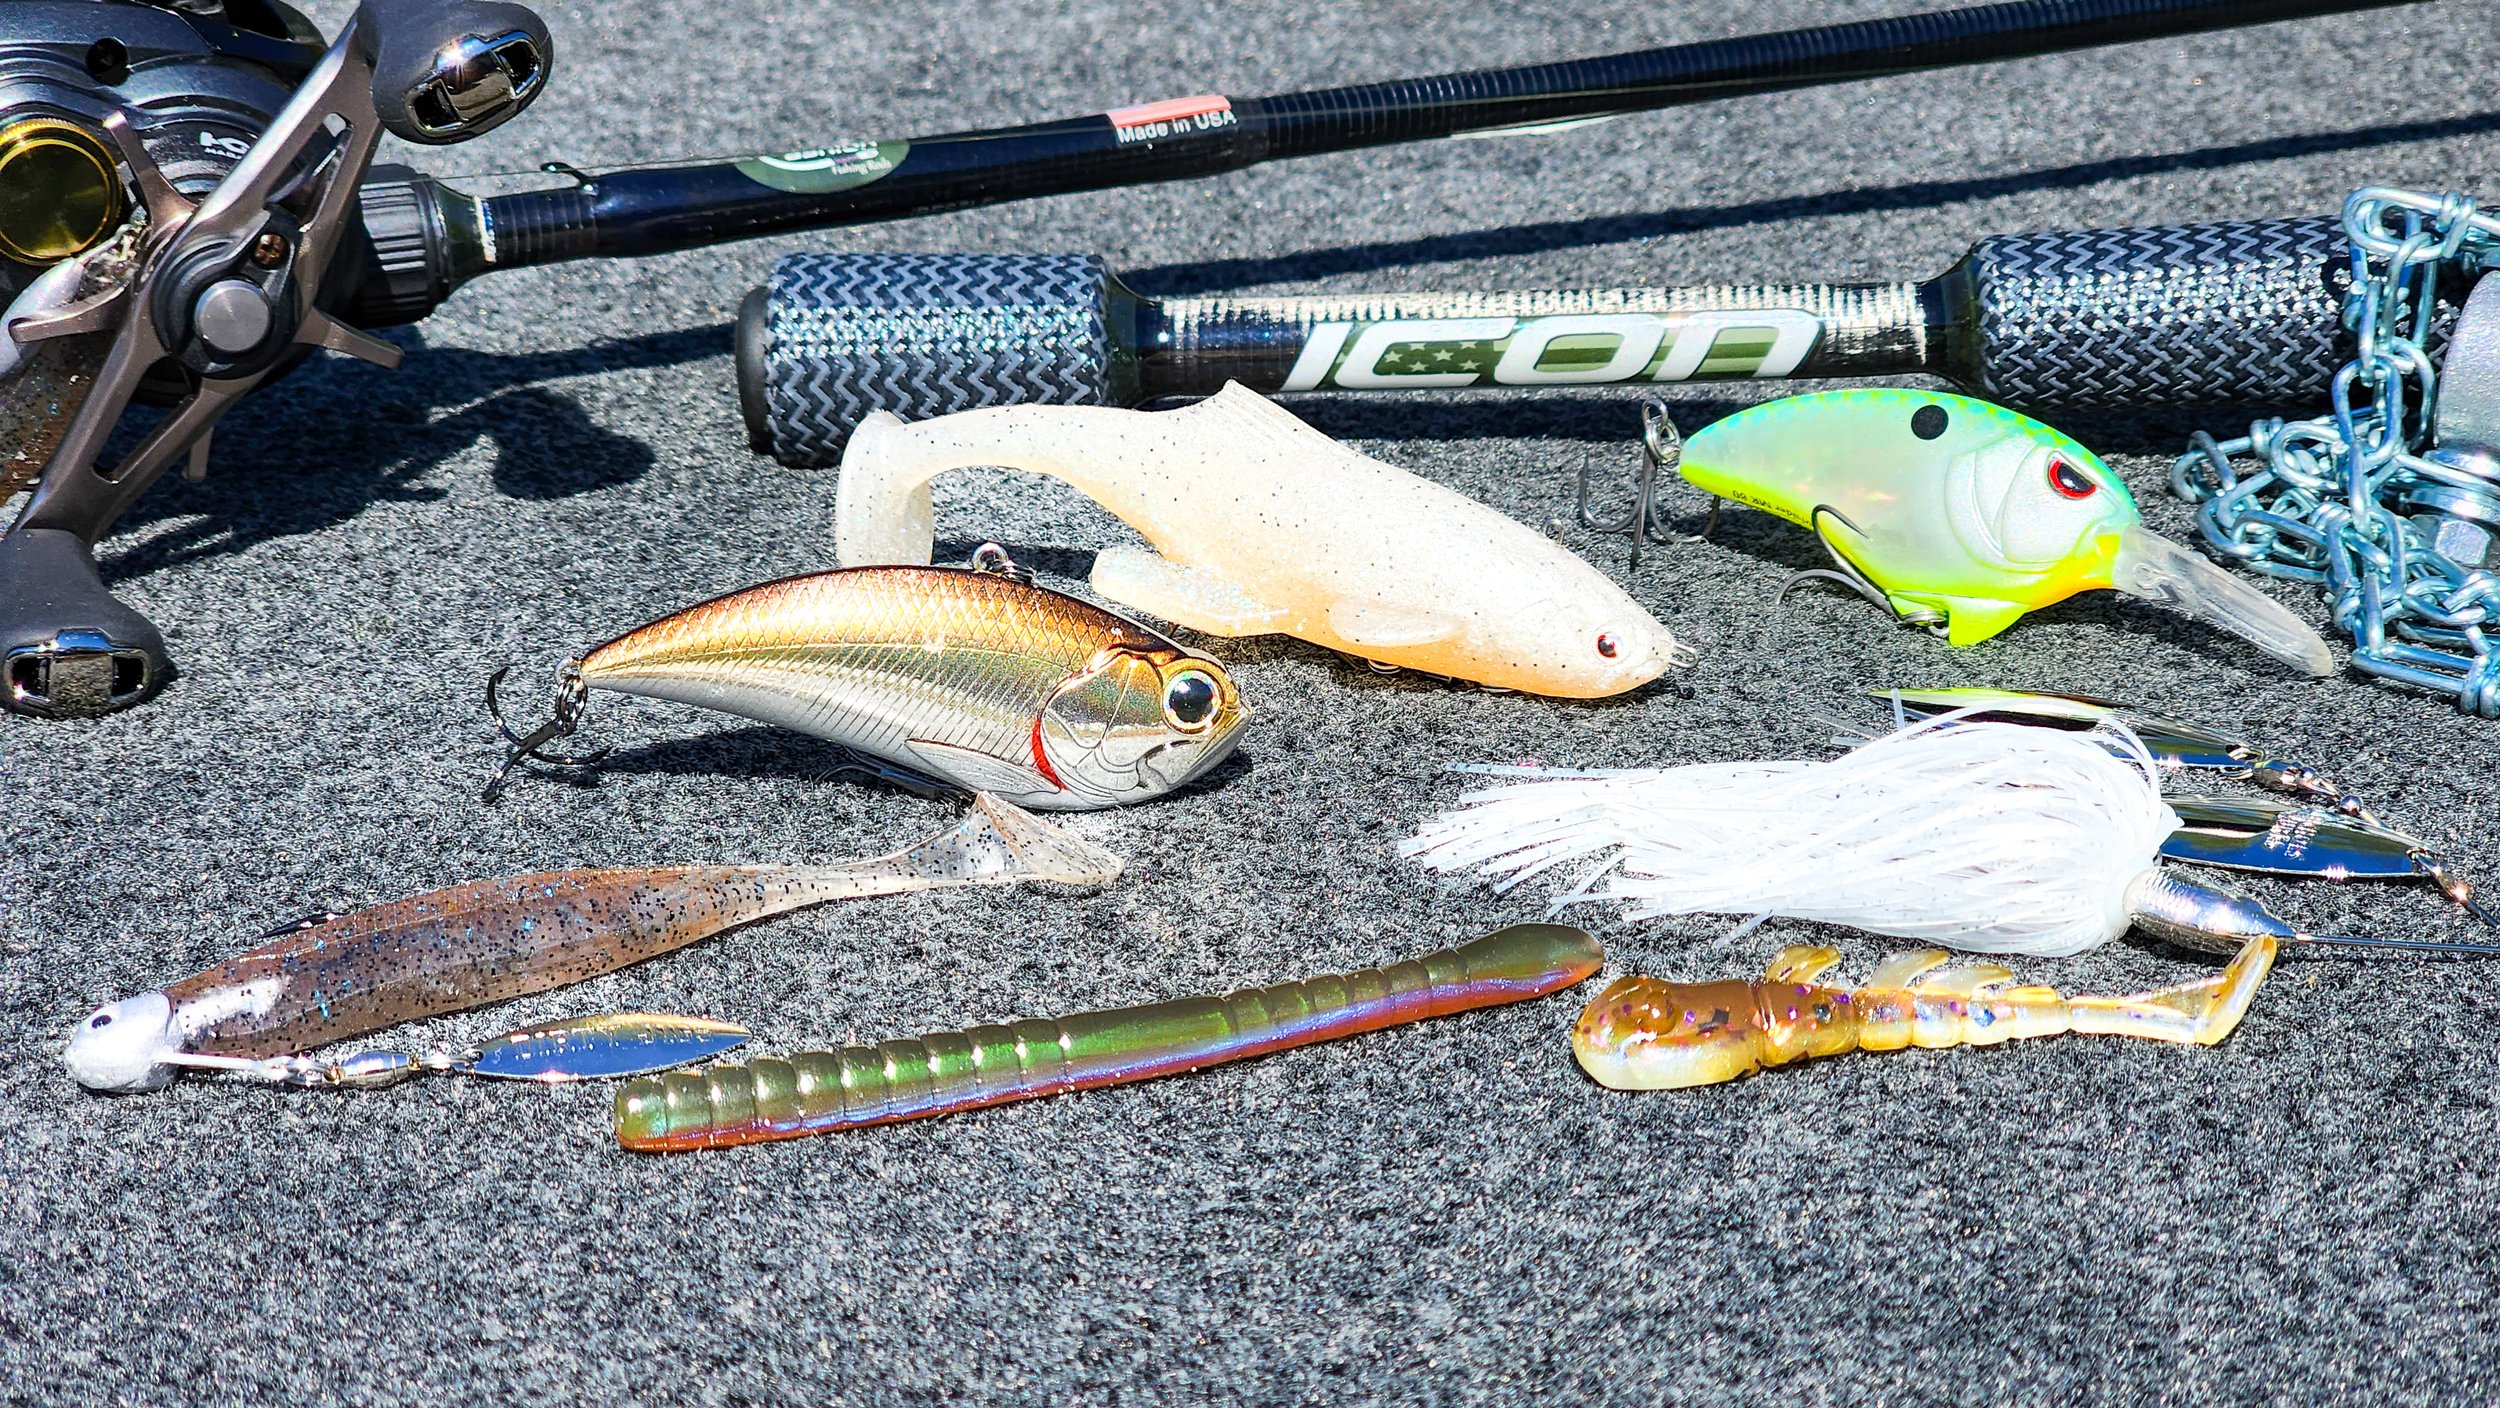 Gear Review! New Lures Bait Finesse Rods, Swimbaits, and Tackle For Bass  Fishing! — Tactical Bassin' - Bass Fishing Blog